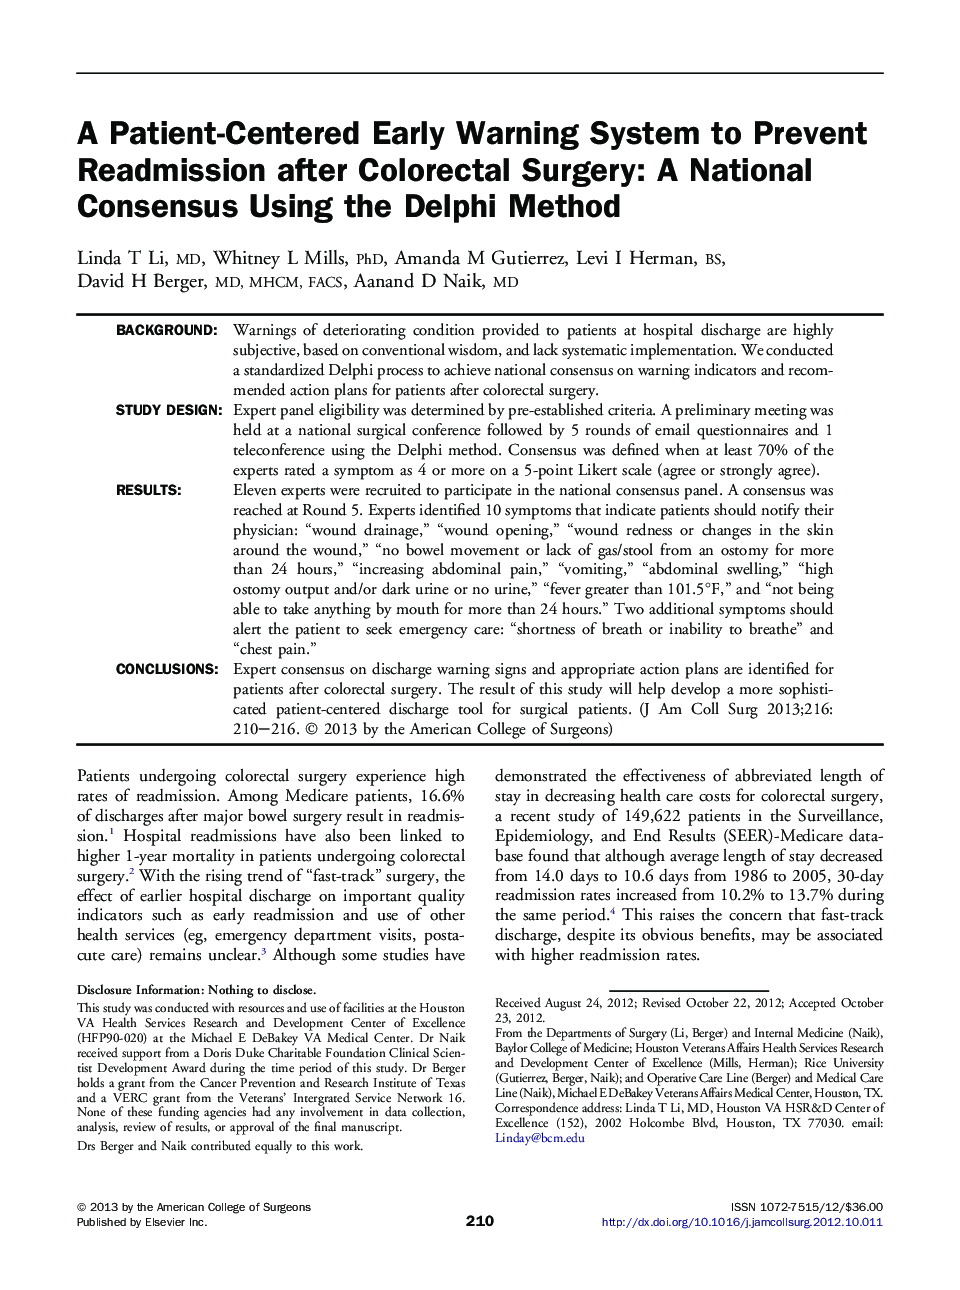 A Patient-Centered Early Warning System to Prevent Readmission after Colorectal Surgery: A National Consensus Using the Delphi Method